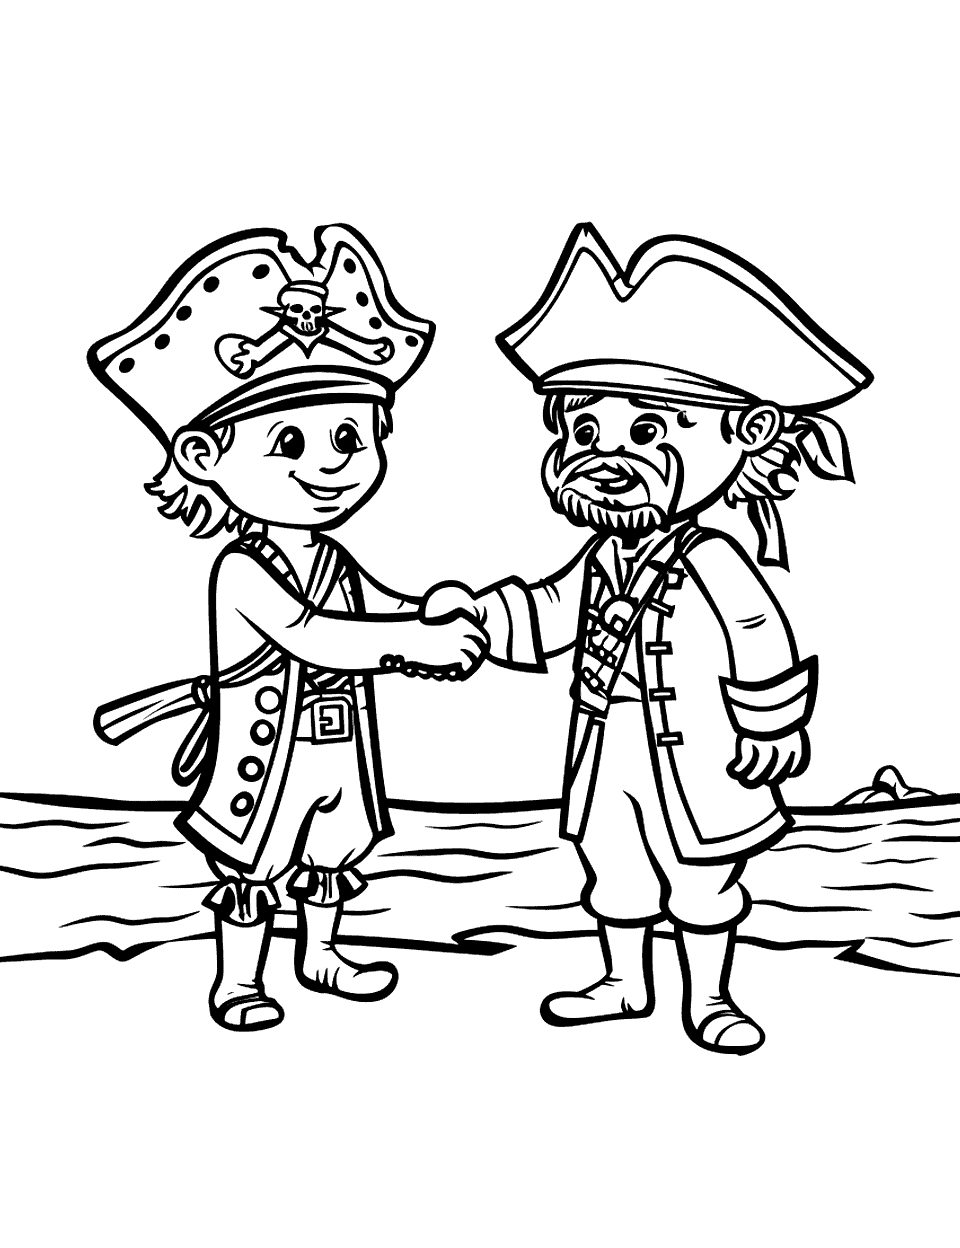 Friendly Pirate Handshake Coloring Page - Two pirates shaking hands on a beach, forming a truce.